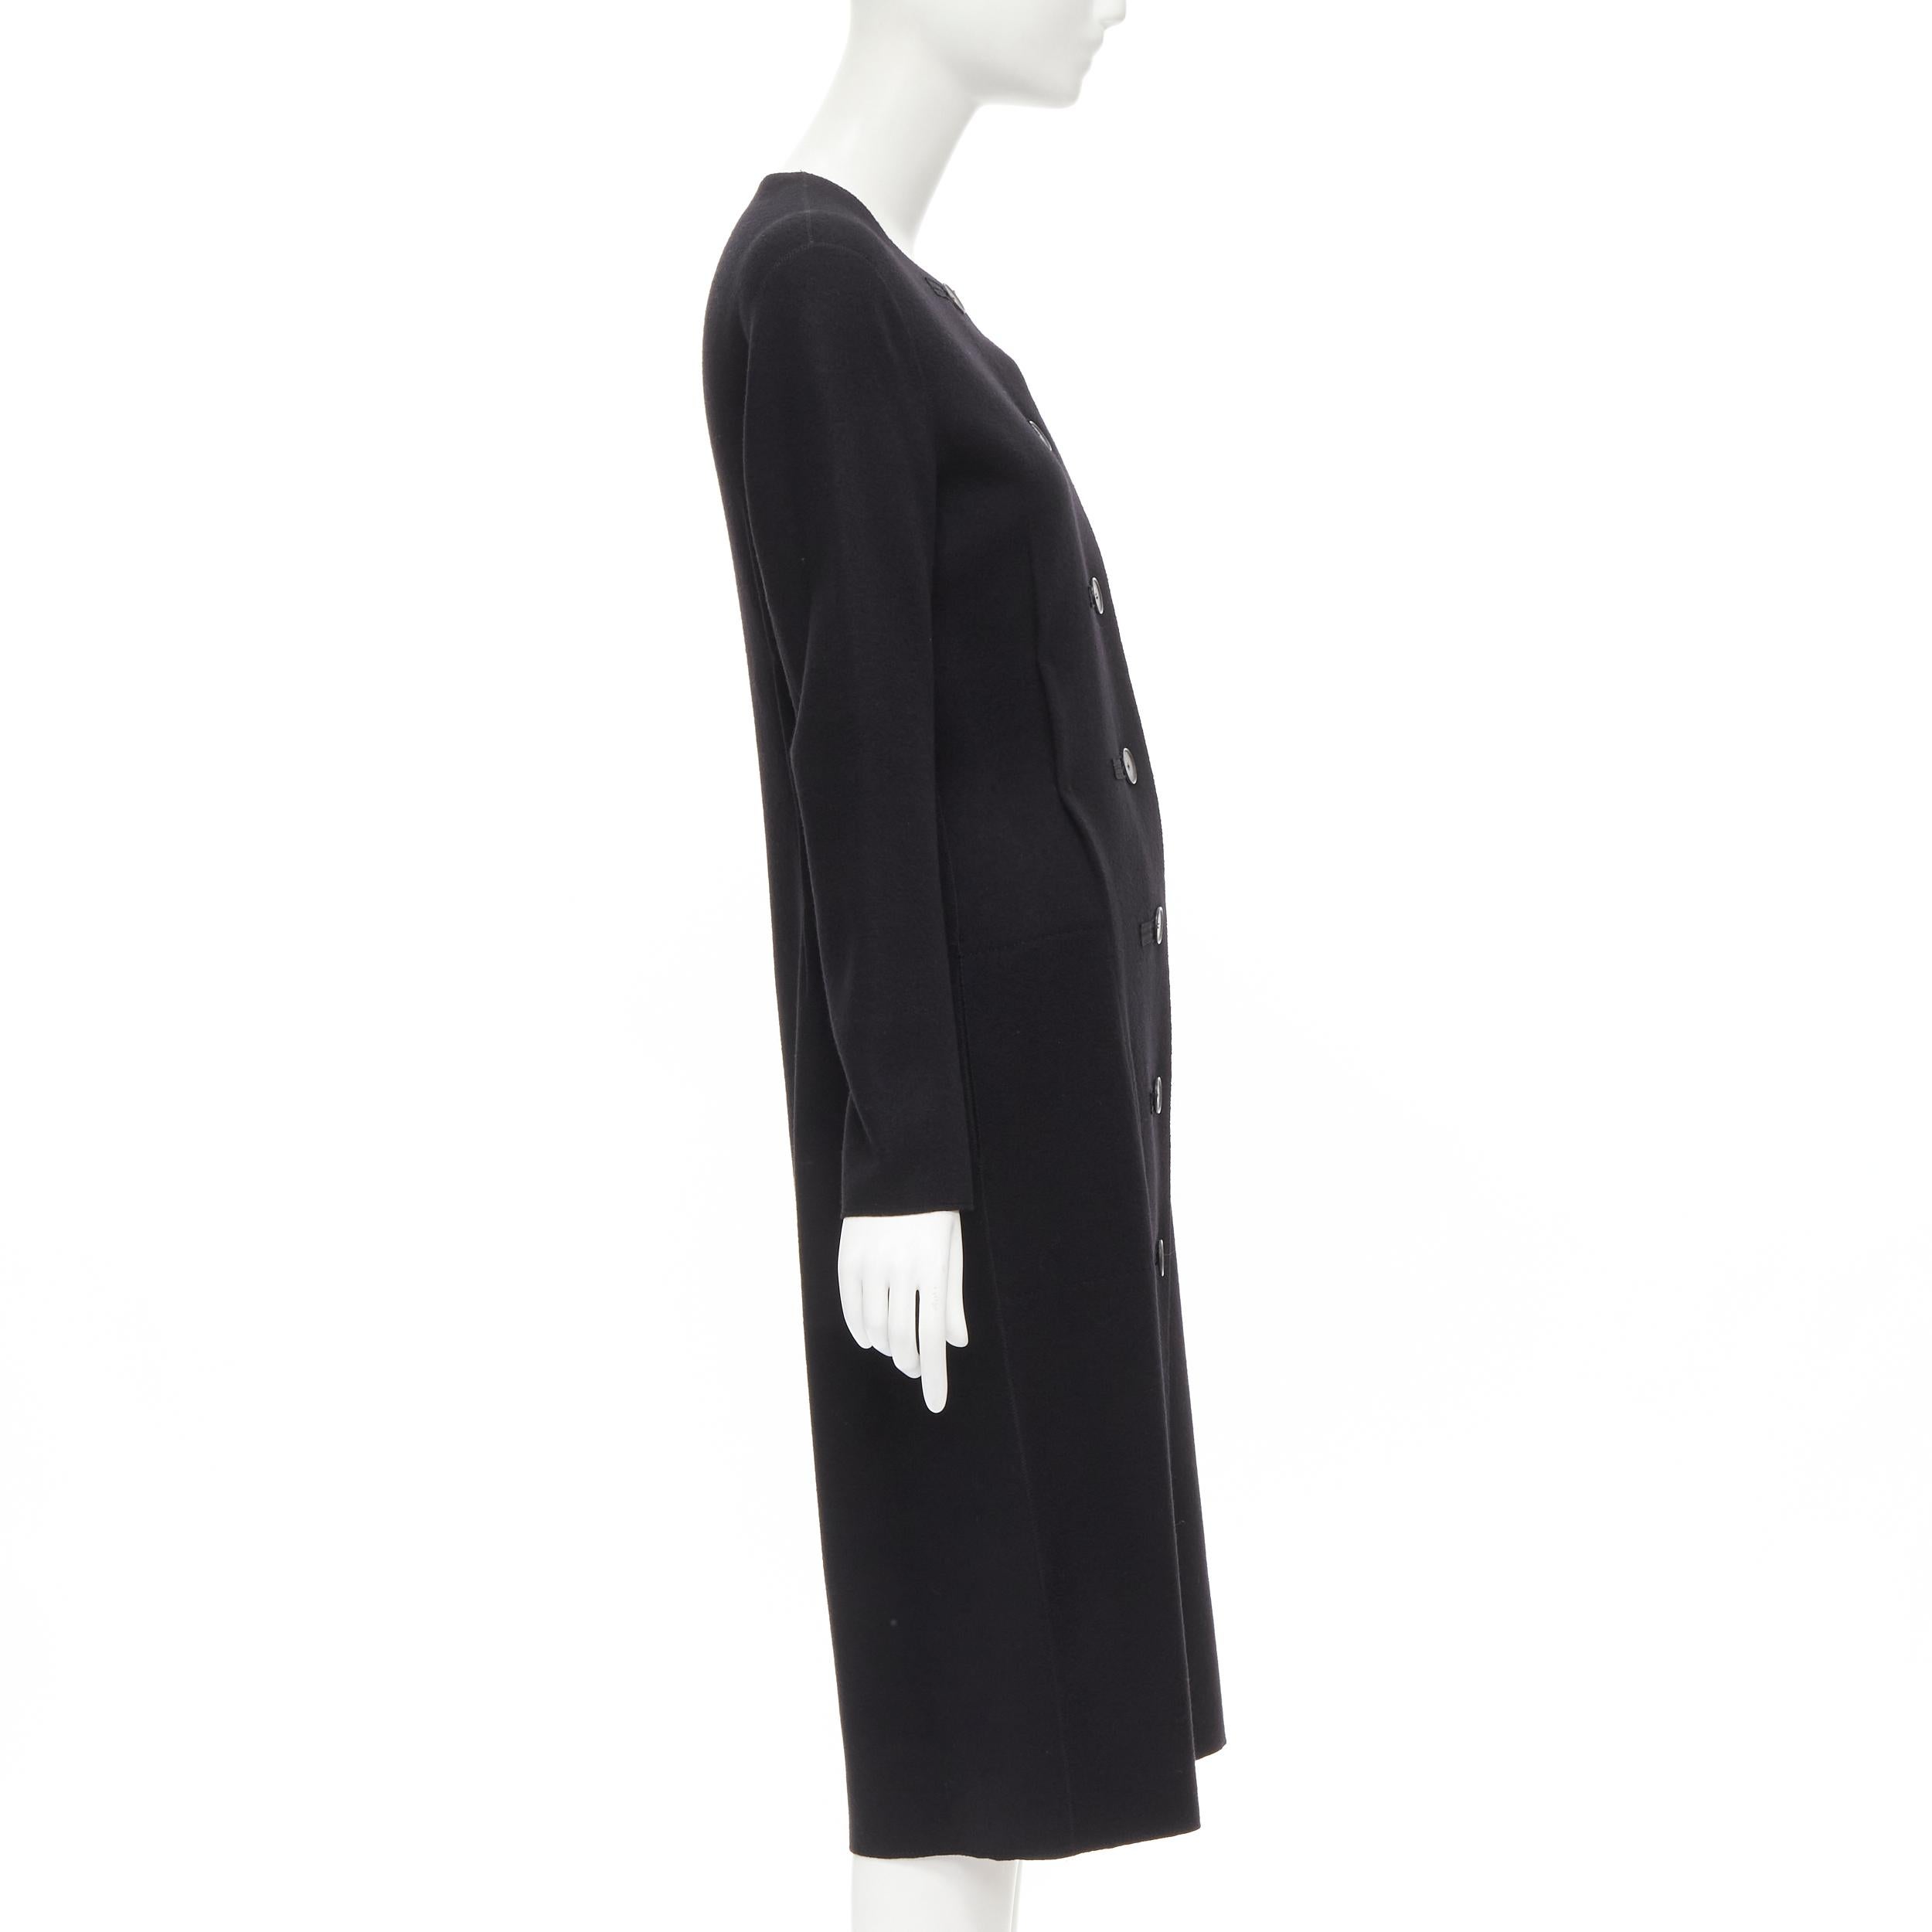 Women's LANVIN Alber Elbaz 2004 black wool pinched darts button front fitted coat FR38 S For Sale